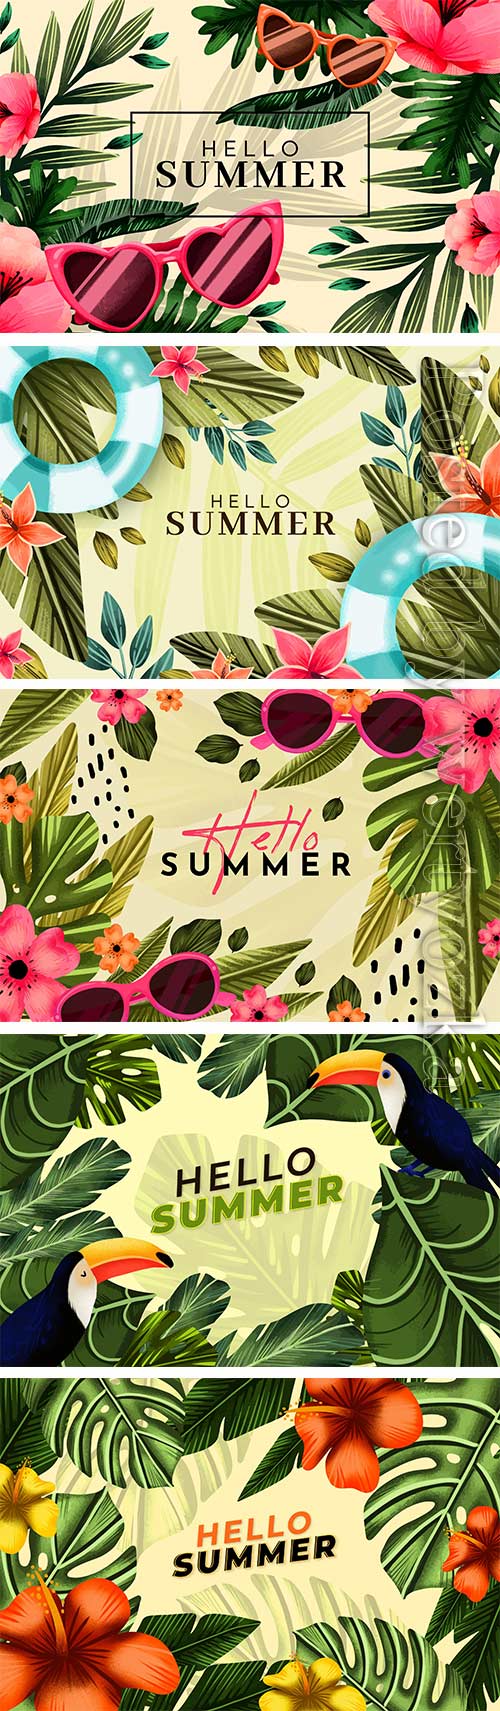 Hello summer hand painted watercolor illustration